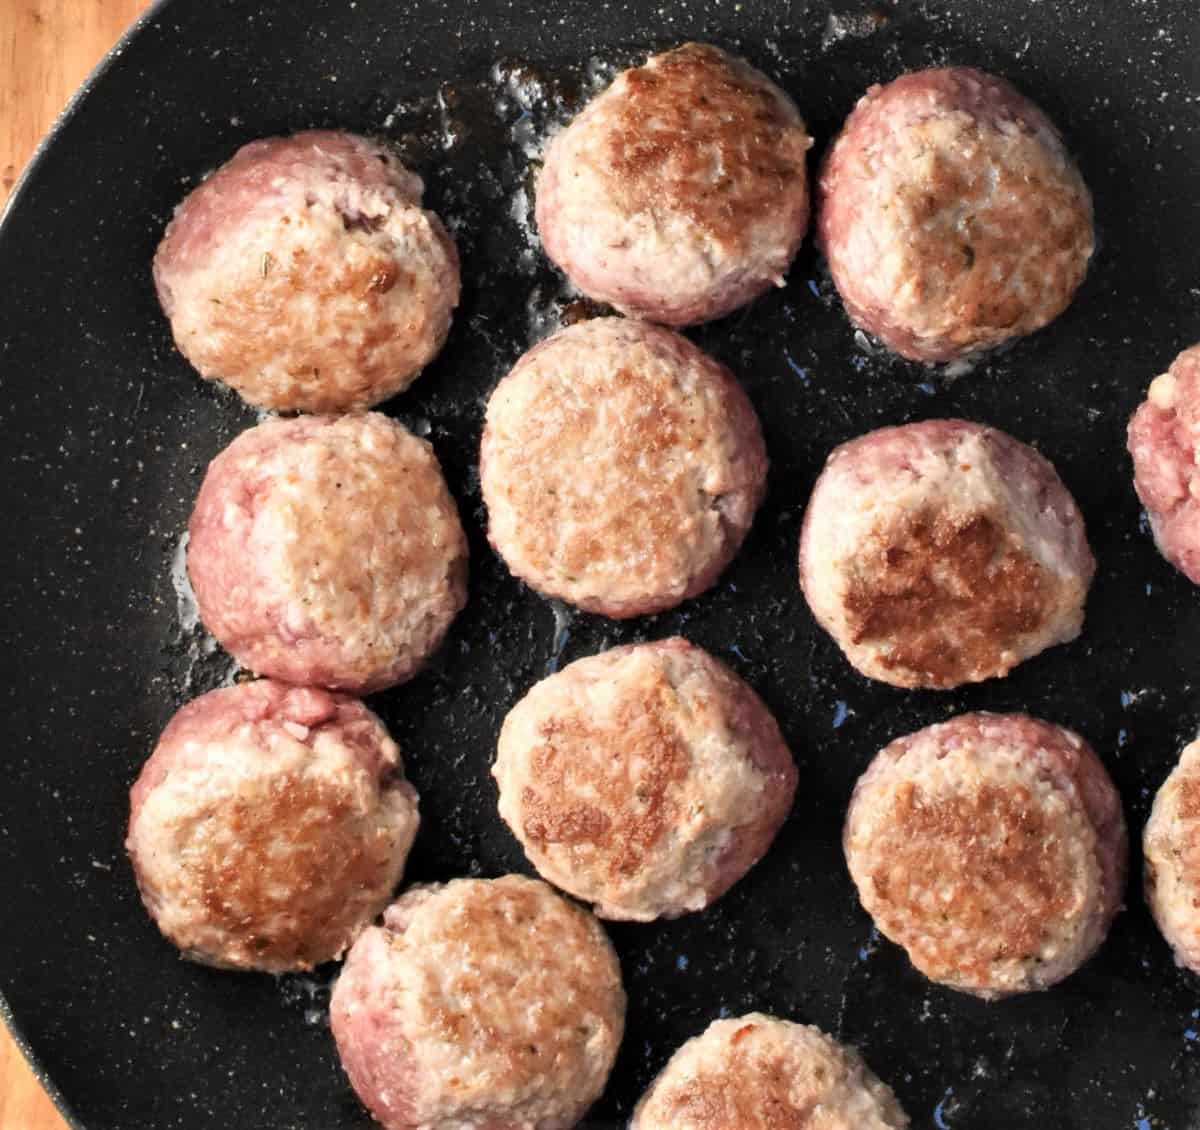 Browning meatballs in large pan.